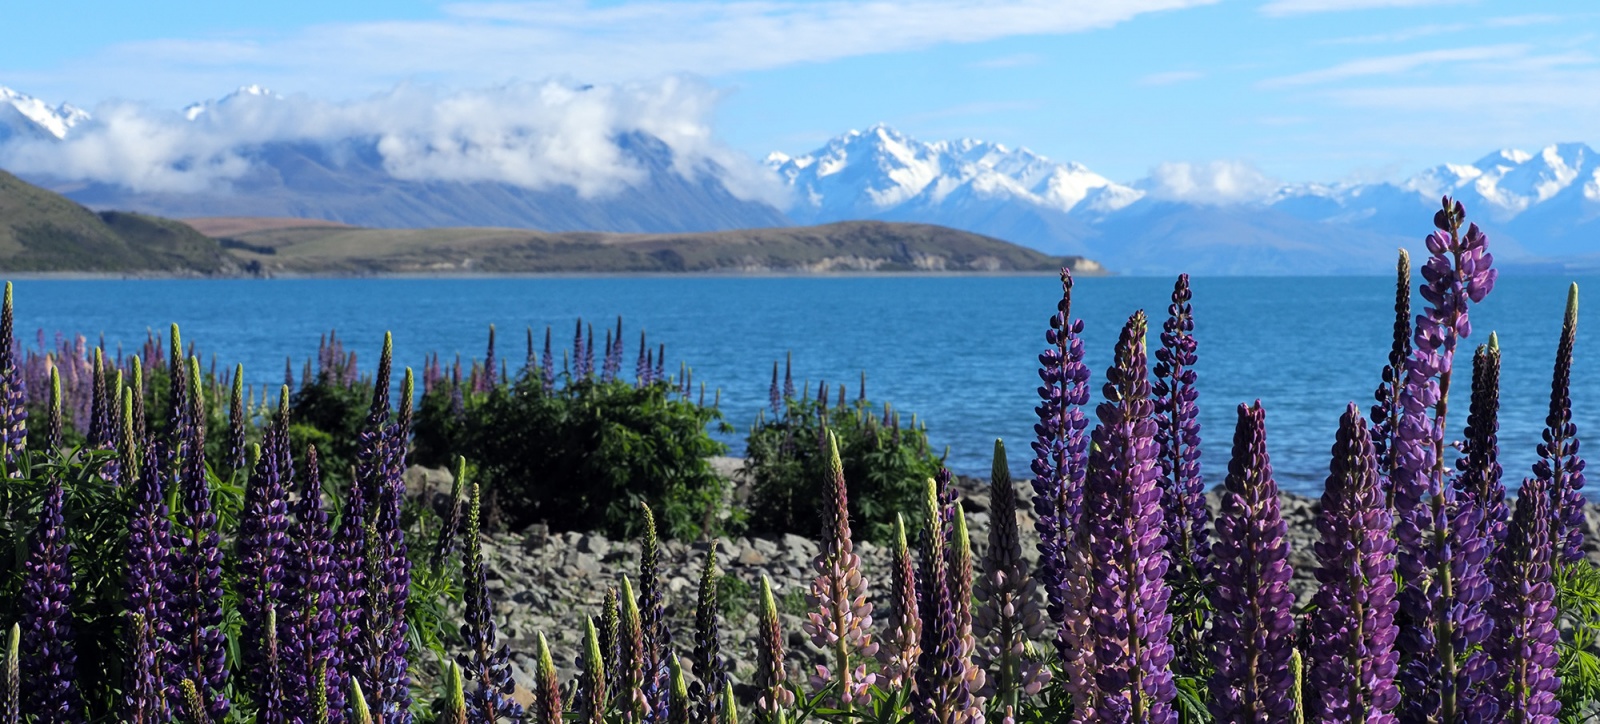 New Zealand, the jewel of the antipodes - Conference